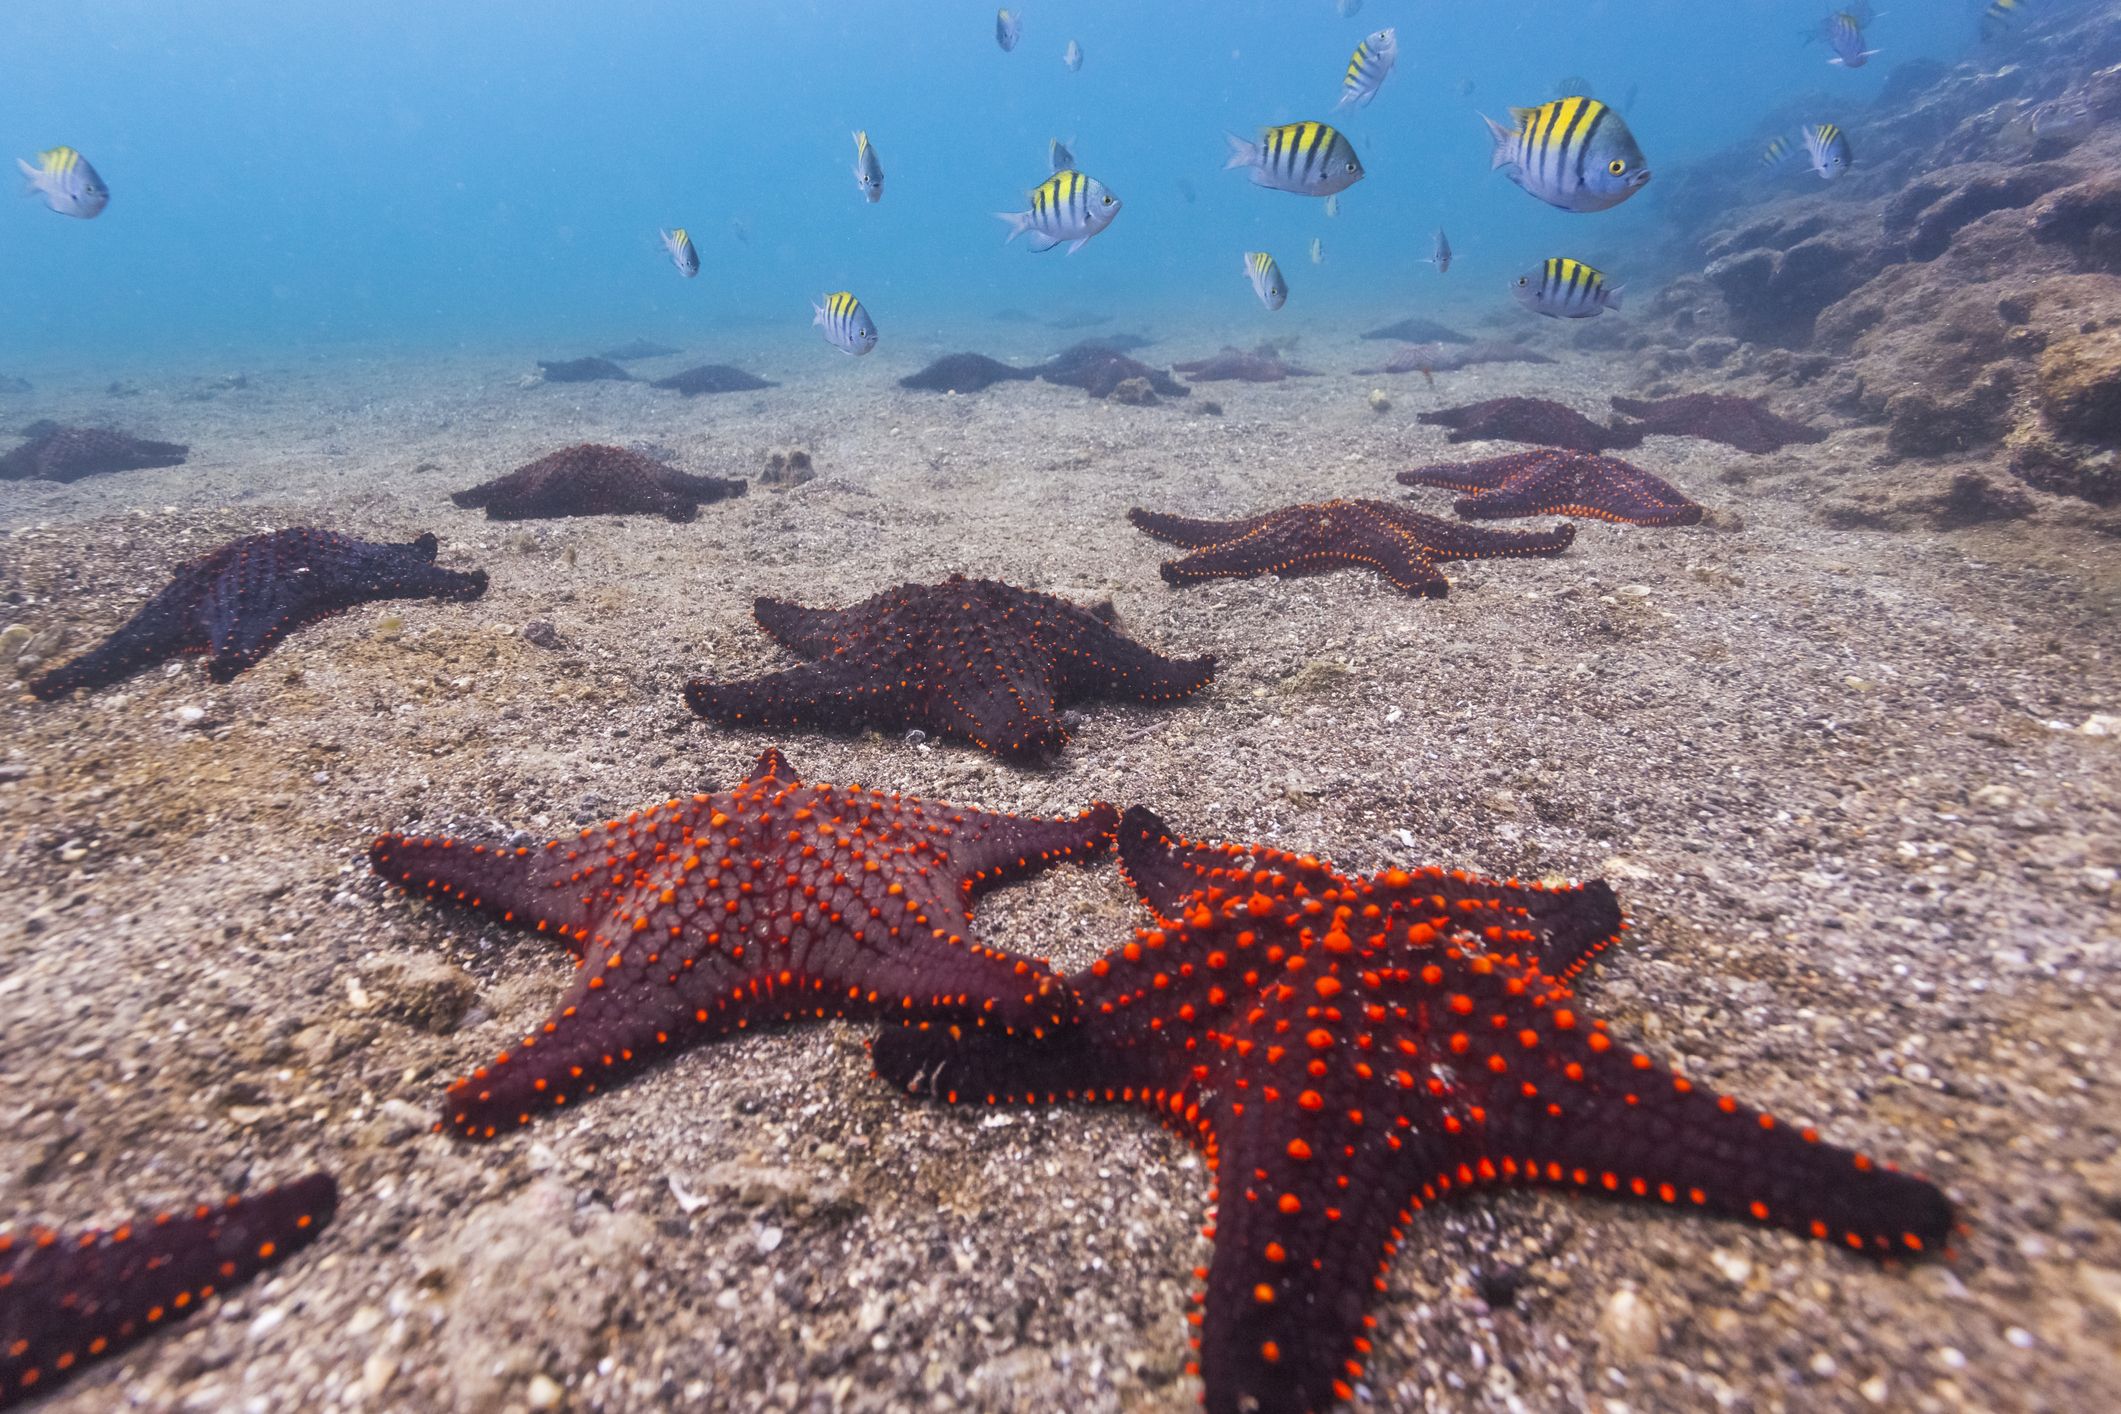 Scientists finally work out where a starfish's head is - BBC Science Focus  Magazine